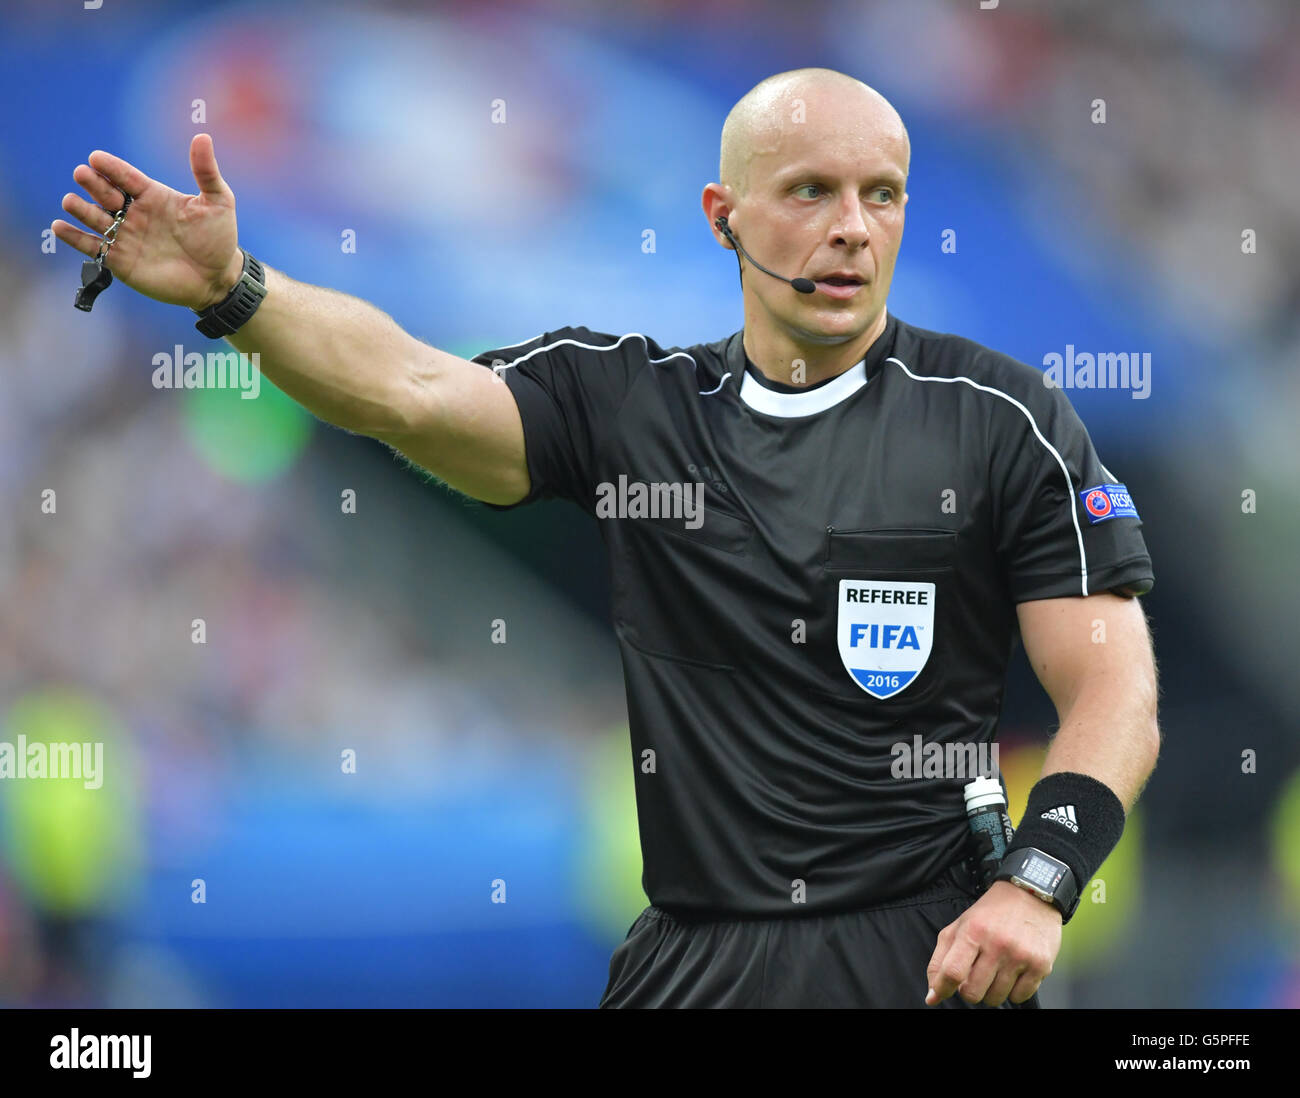 Referee Szymon Marciniak of Poland gestures during the Group F preliminary round soccer match of the UEFA EURO 2016 between Iceland and Austria at the Stade de France in St. Denis, France, 22 June 2016. Photo: Peter Kneffel/dpa (RESTRICTIONS APPLY: For editorial news reporting purposes only. Not used for commercial or marketing purposes without prior written approval of UEFA. Images must appear as still images and must not emulate match action video footage. Photographs published in online publications (whether via the Internet or otherwise) shall have an interval of at least 20 seconds betwee Stock Photo